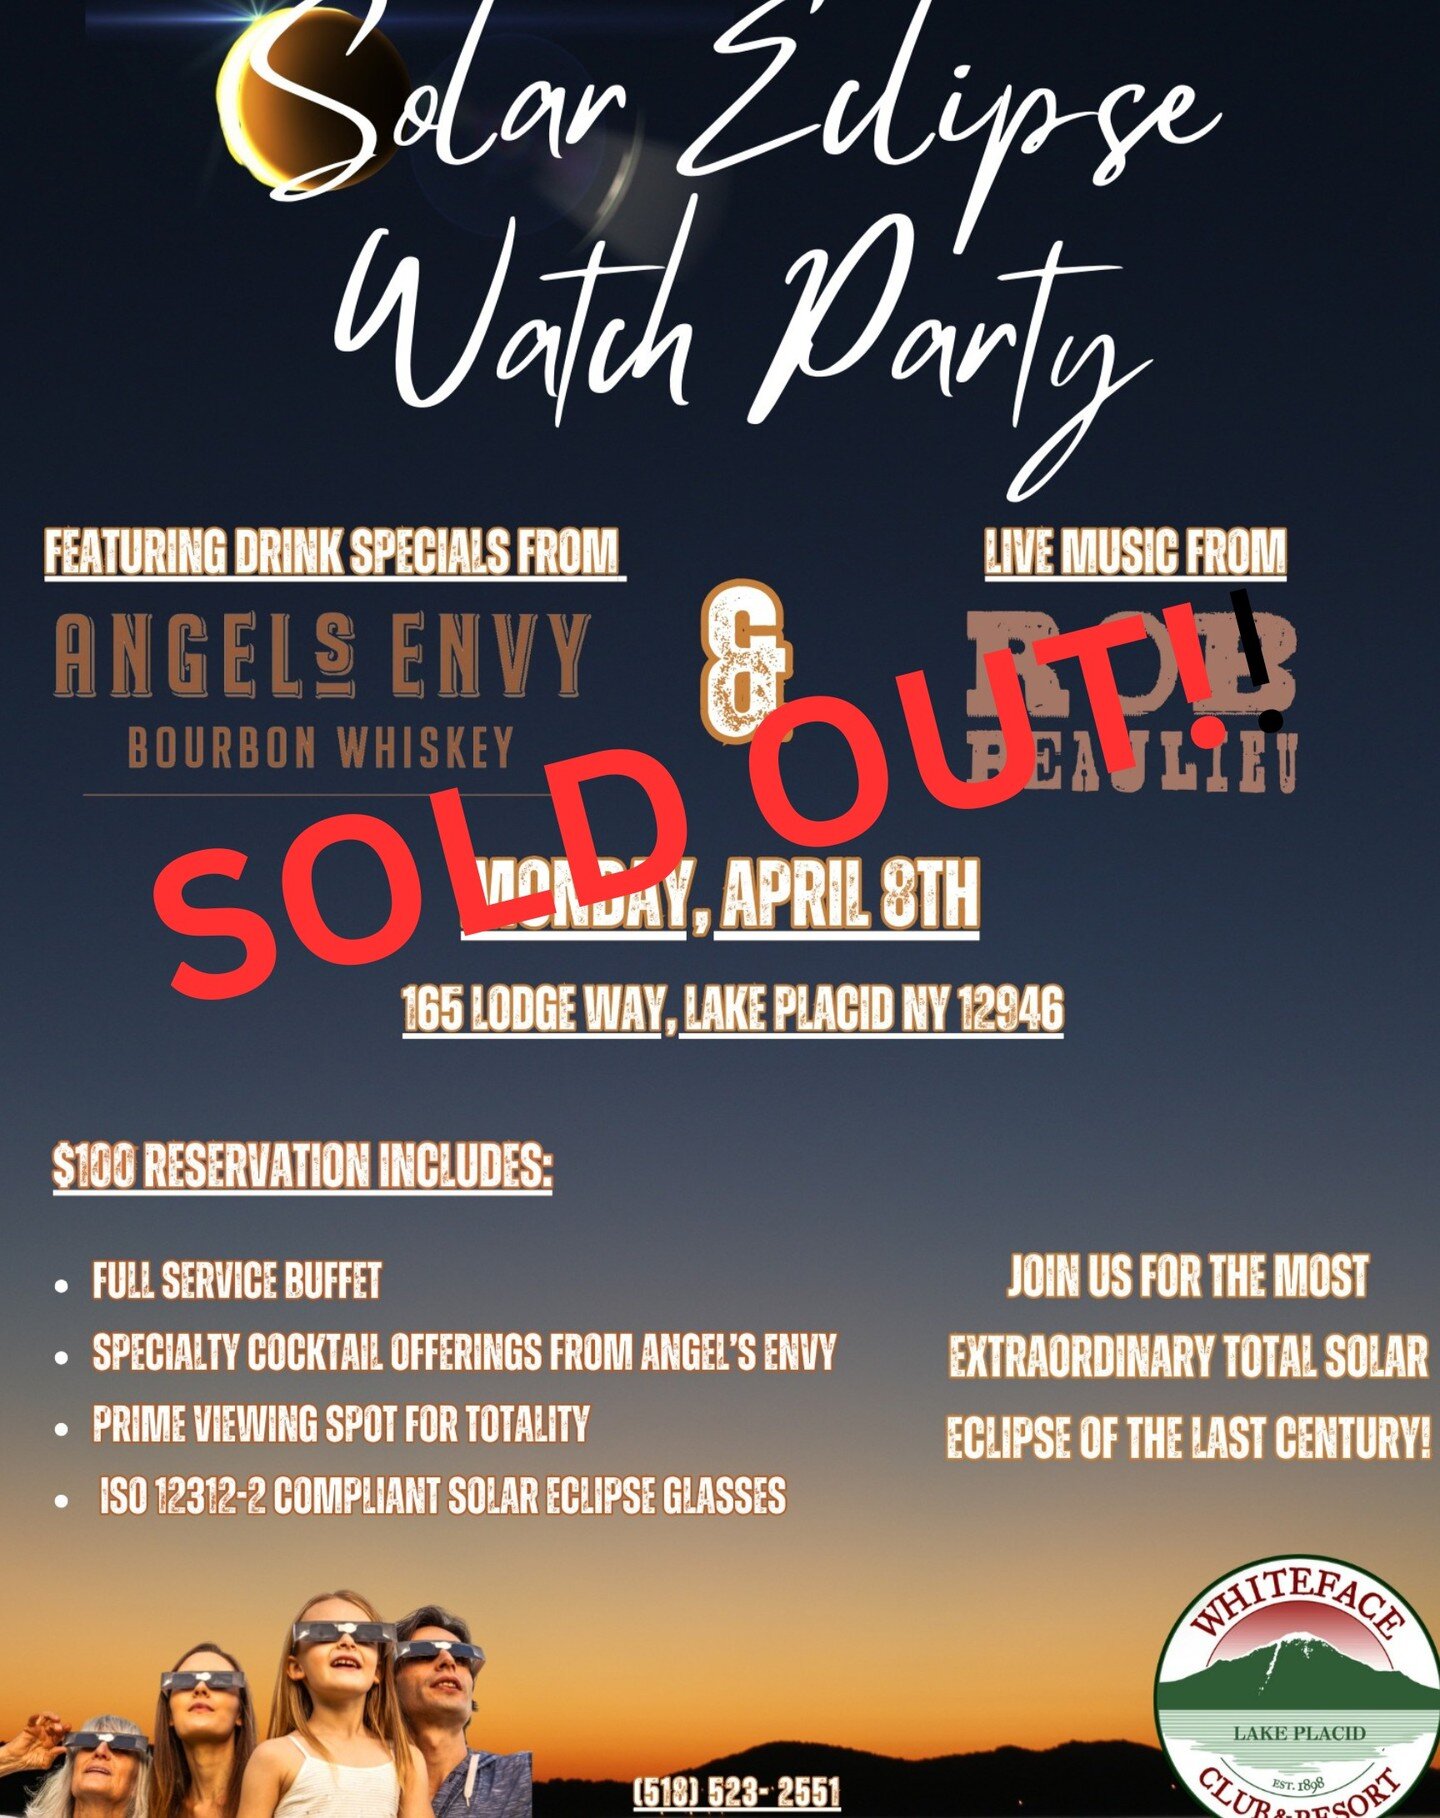 Happy Sunday! Just a heads up... our show tomorrow at the Whiteface Club and Resort for the Solar Eclipse Watch Party is officially SOLD OUT! This is going to be a fun show and we are excited to play for such an epic event! Thanks for the support and